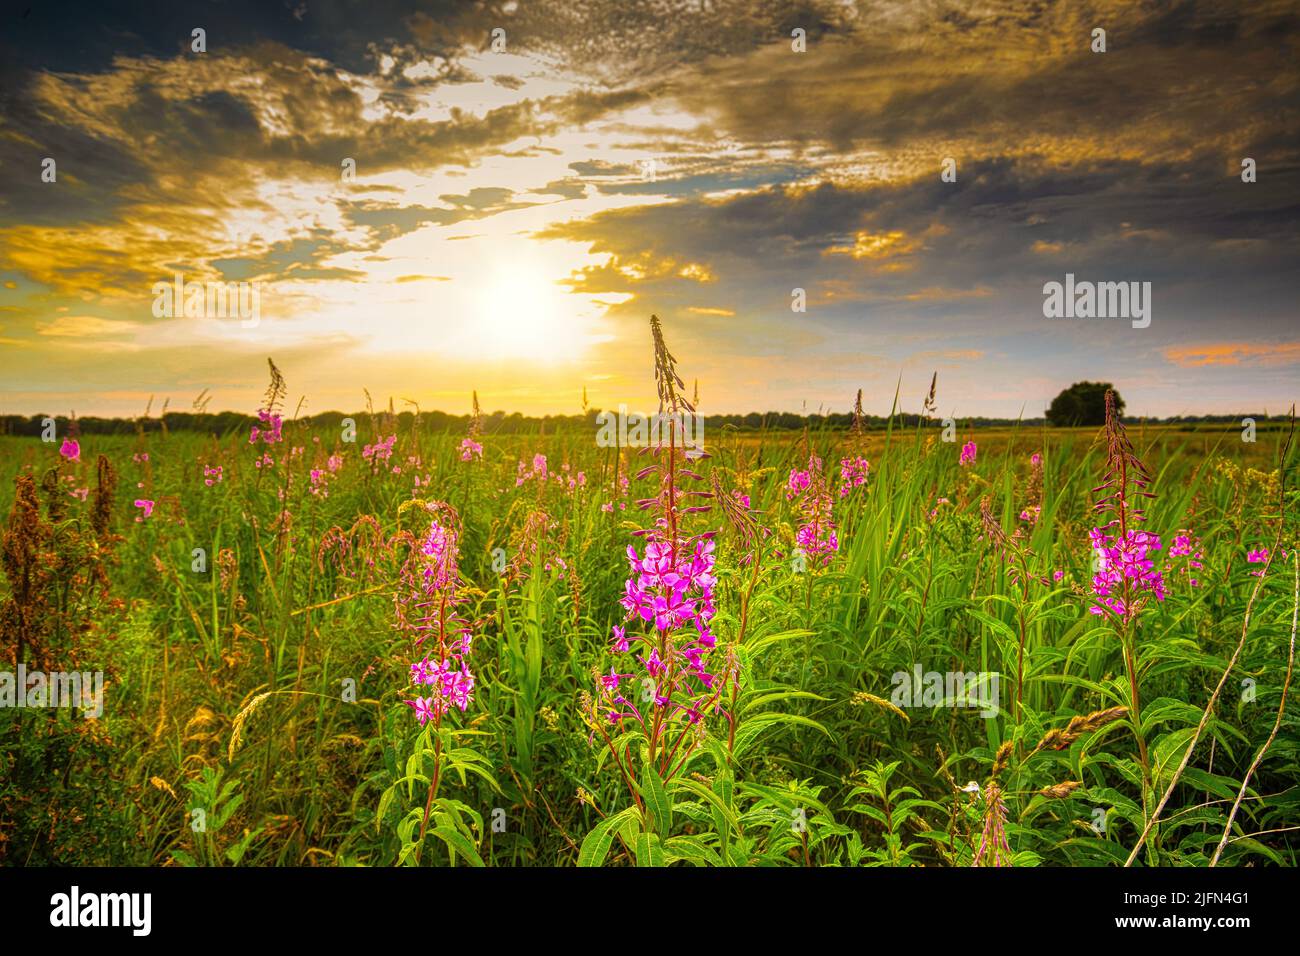 Drents landscape near Rolder Diep during sunset with blooming hairy fireweed, Epilobium hirsutum, against a background of warm light setting sun and g Stock Photo